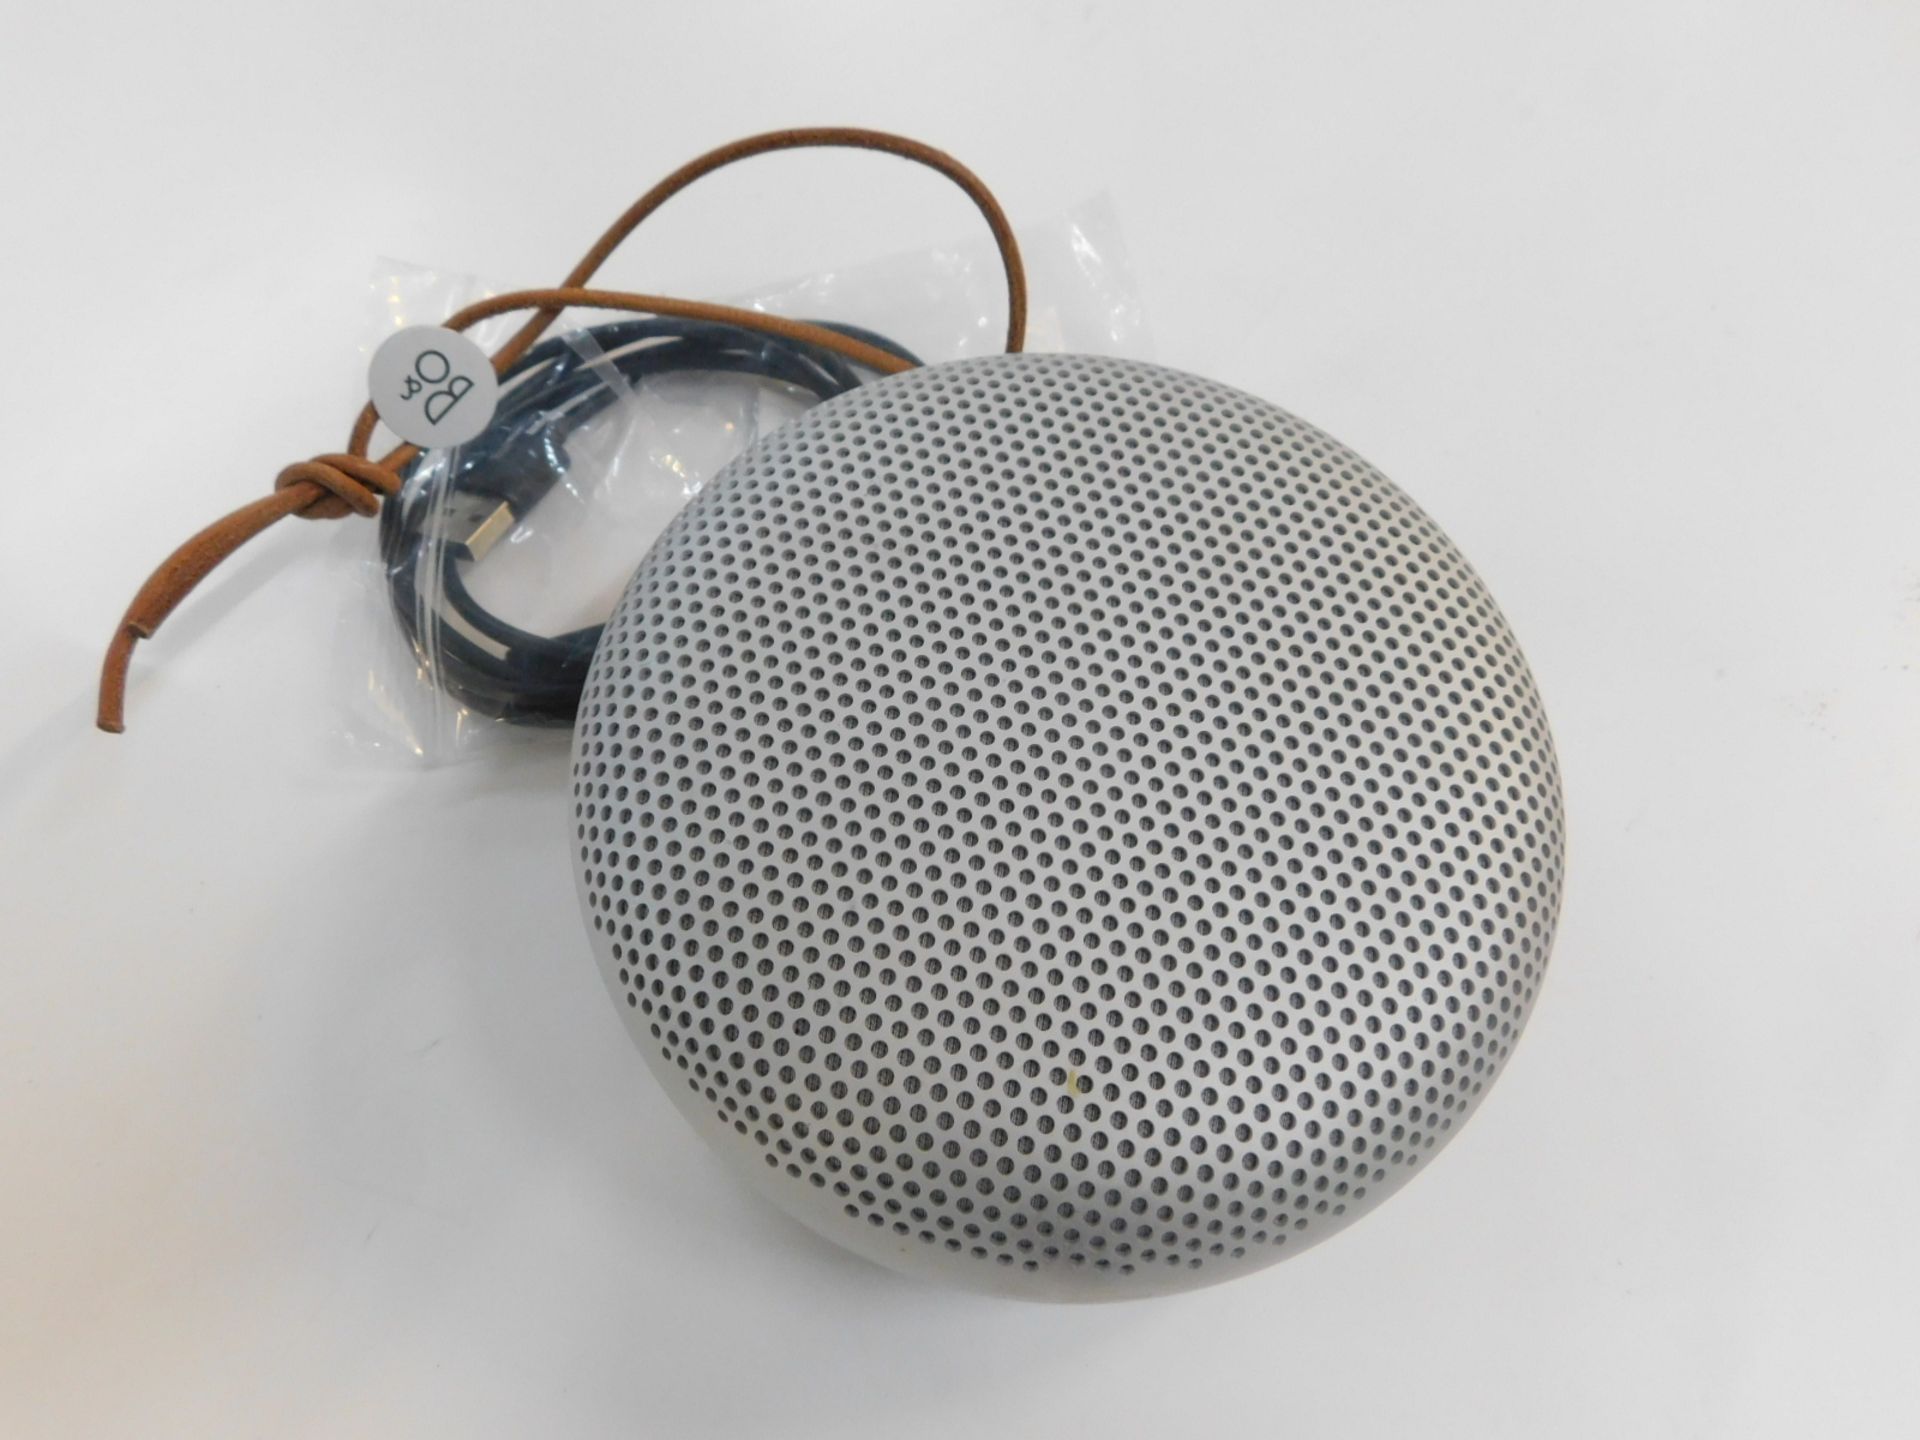 1 BANG AND OLUFSEN A1 NATURAL BLUETOOTH SPEAKER RRP £299